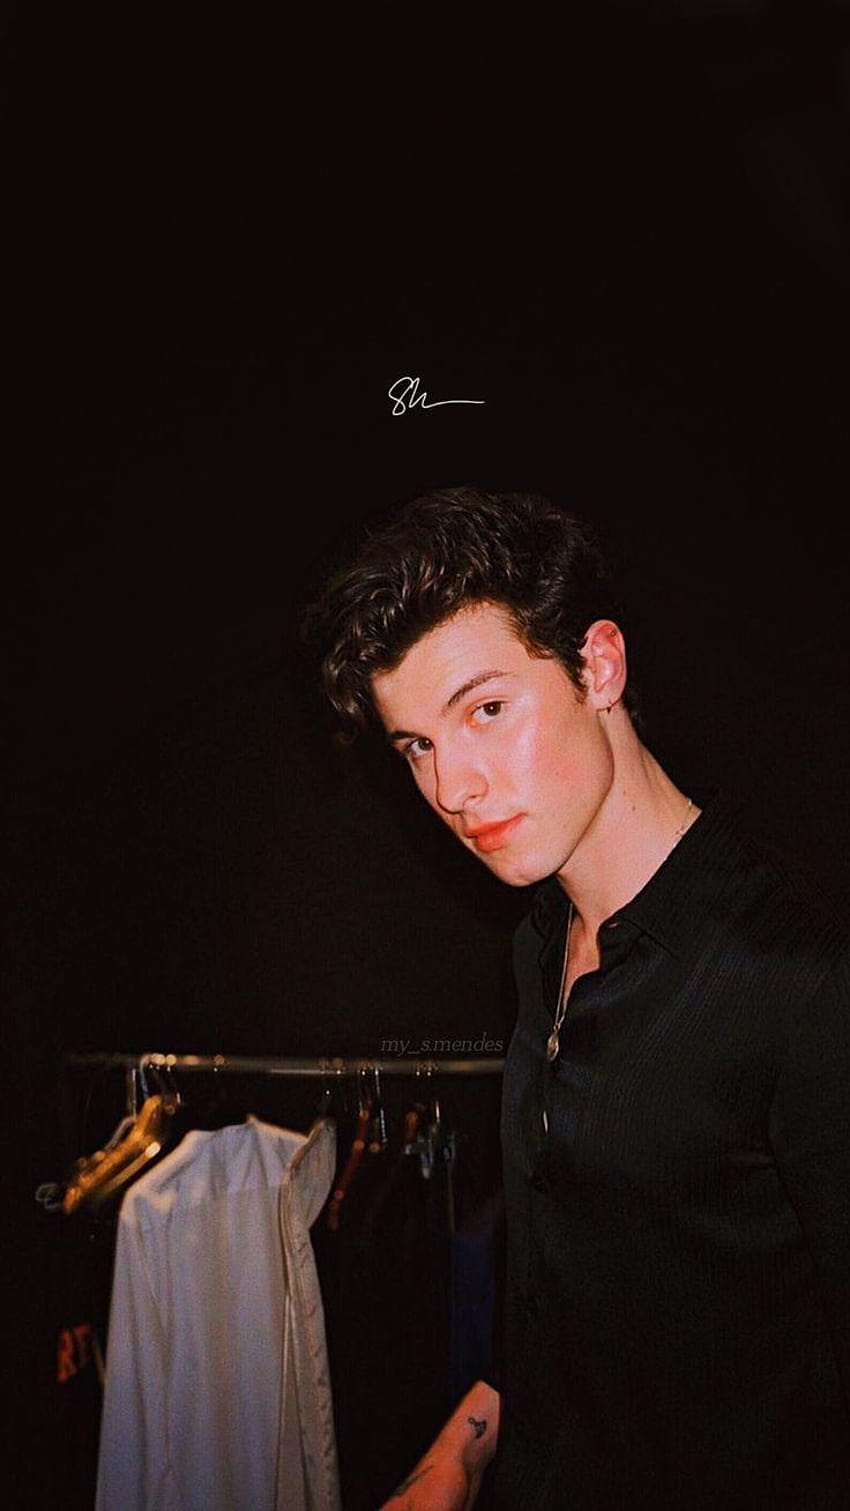 Shawn mendes aesthetic HD phone wallpaper